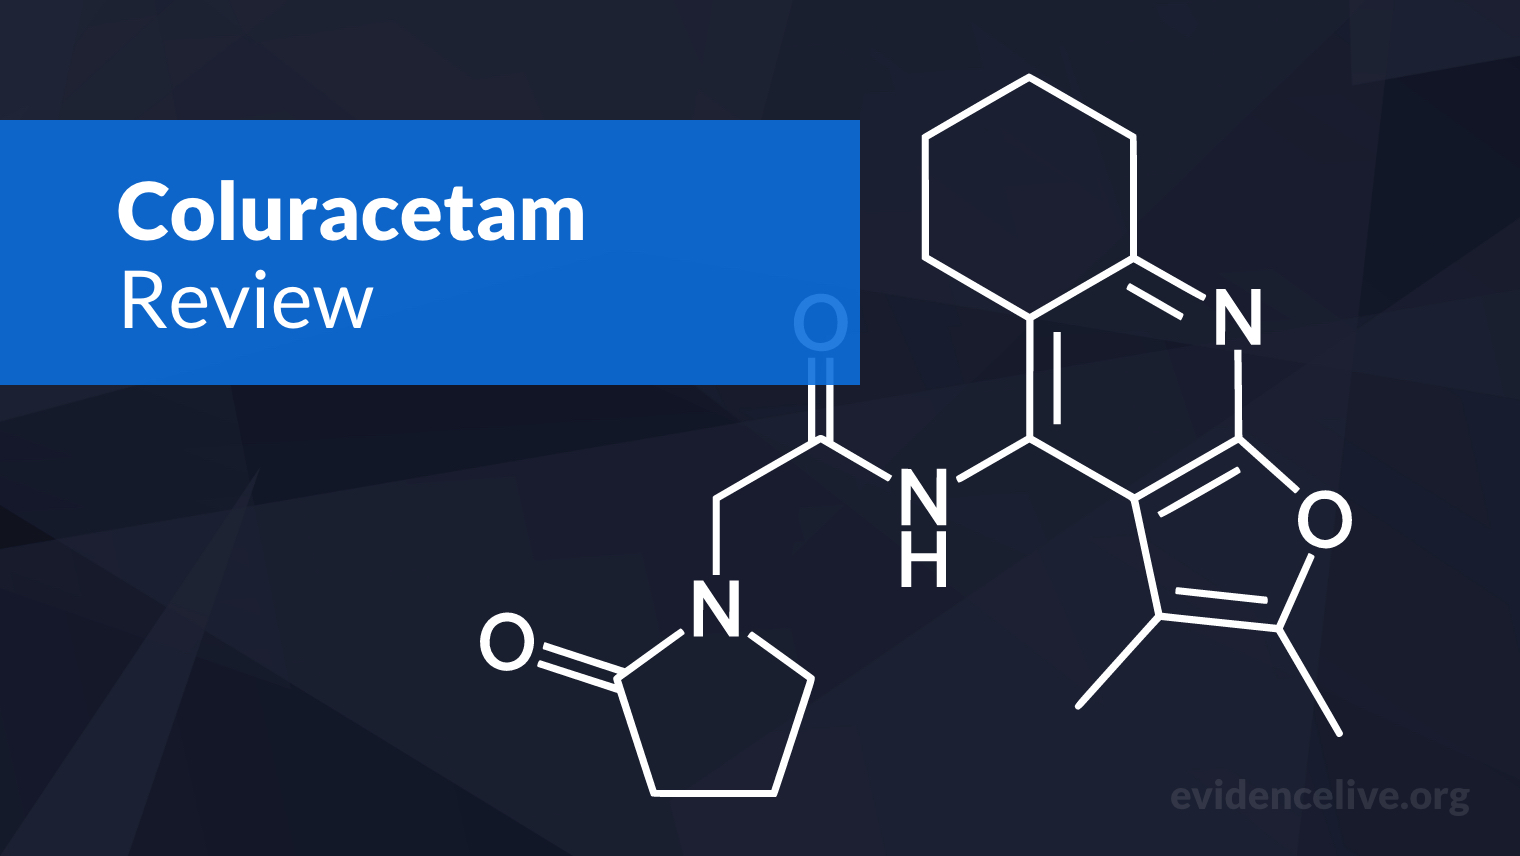 Coluracetam: Benefits, Uses, Dosage, and Side Effects